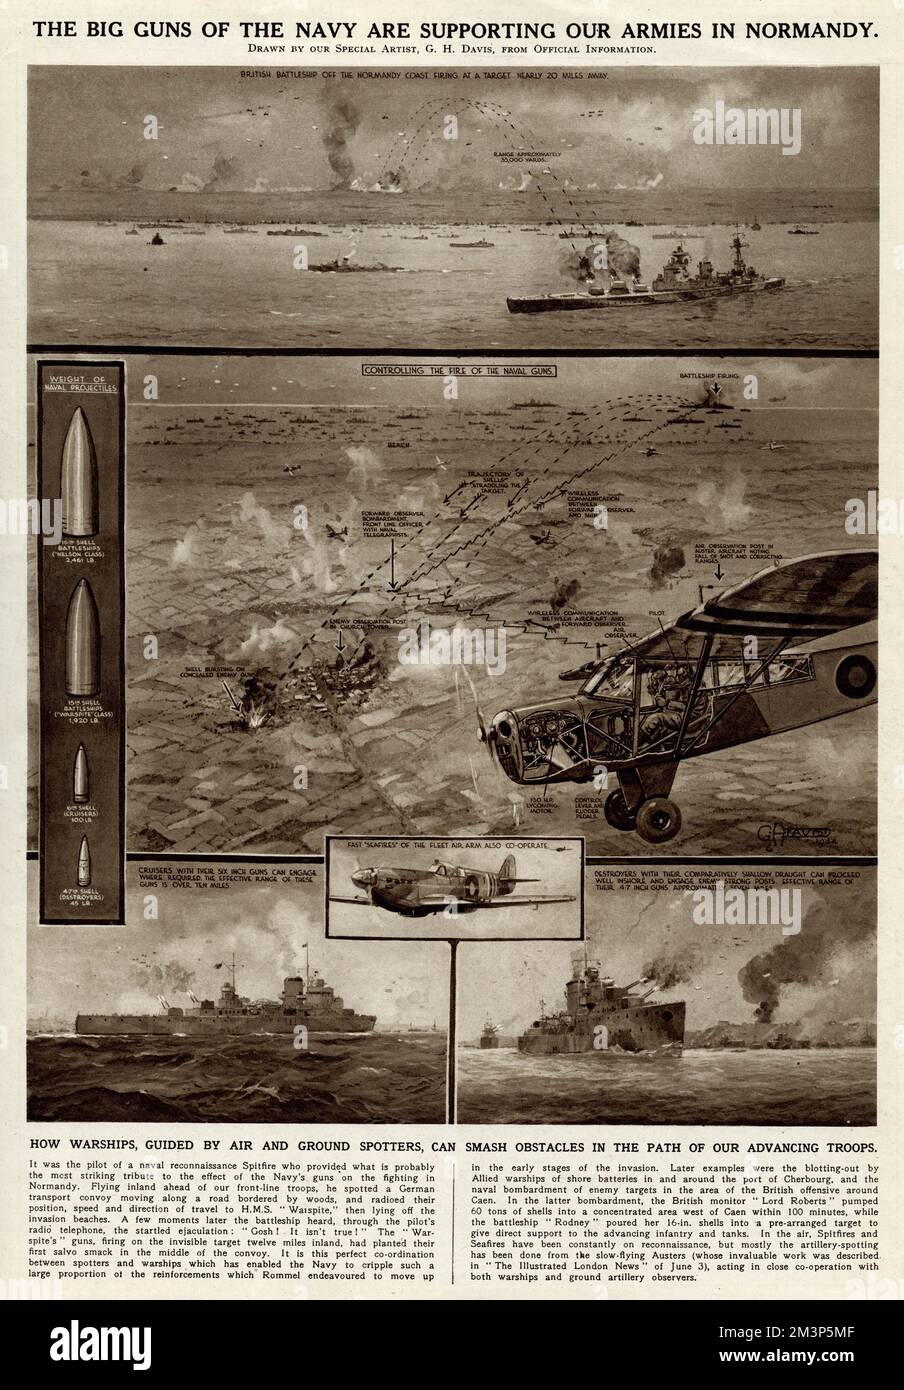 The big guns of the Royal Navy supporting the Allied armies in Normandy during the Second World War.  How warships, guided by air and ground spotters, can remove obstacles in the path of advancing troops. Stock Photo